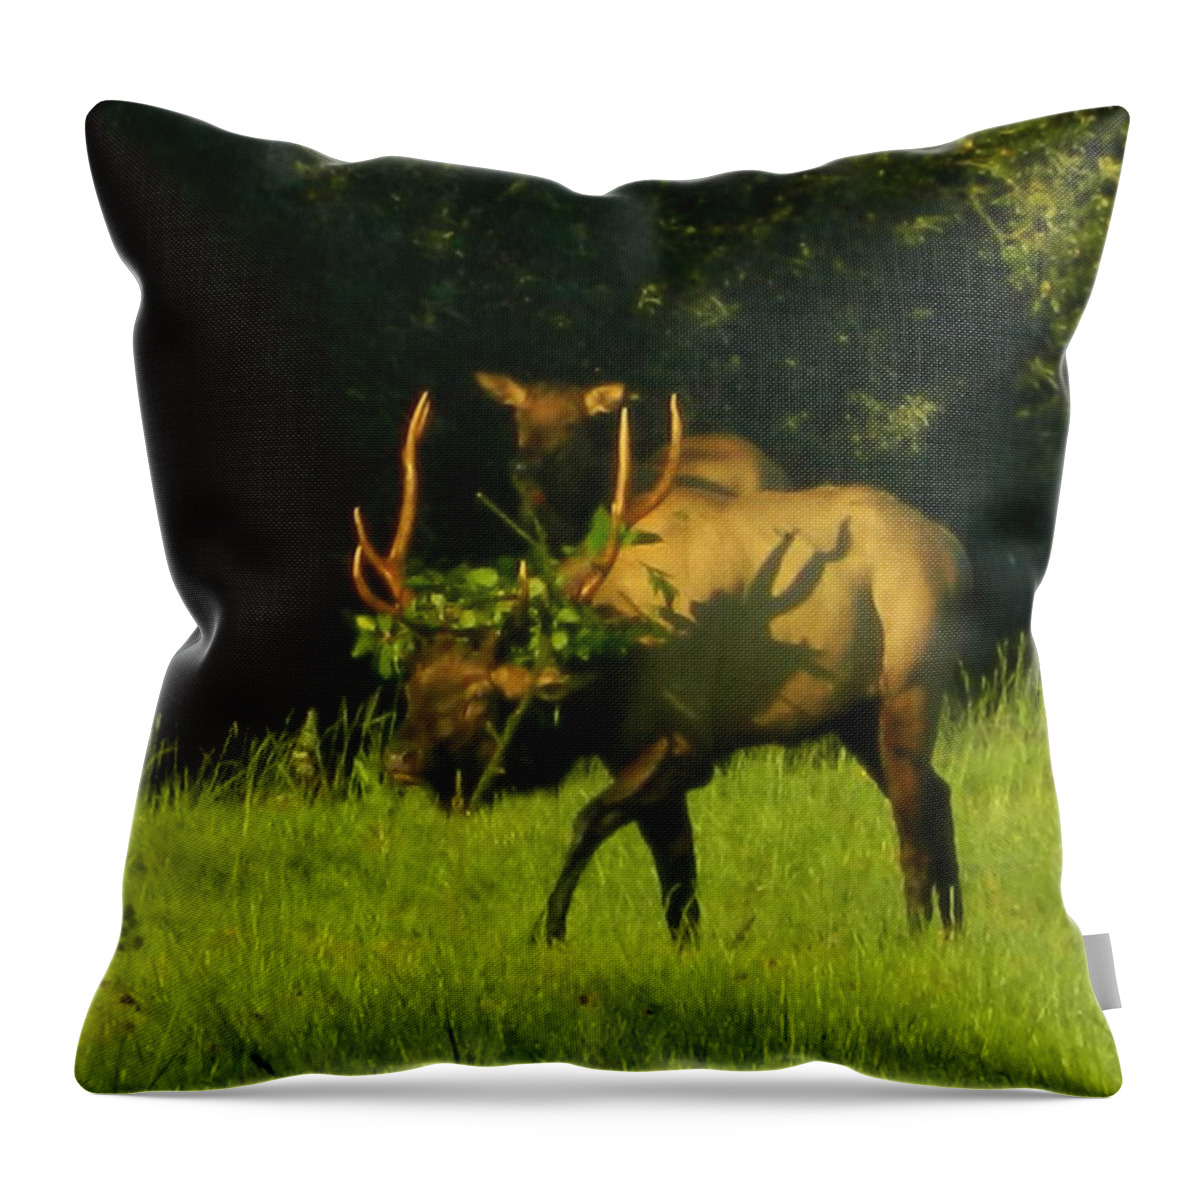 Elk Throw Pillow featuring the photograph Camoflaged Elk With Shadows by Gallery Of Hope